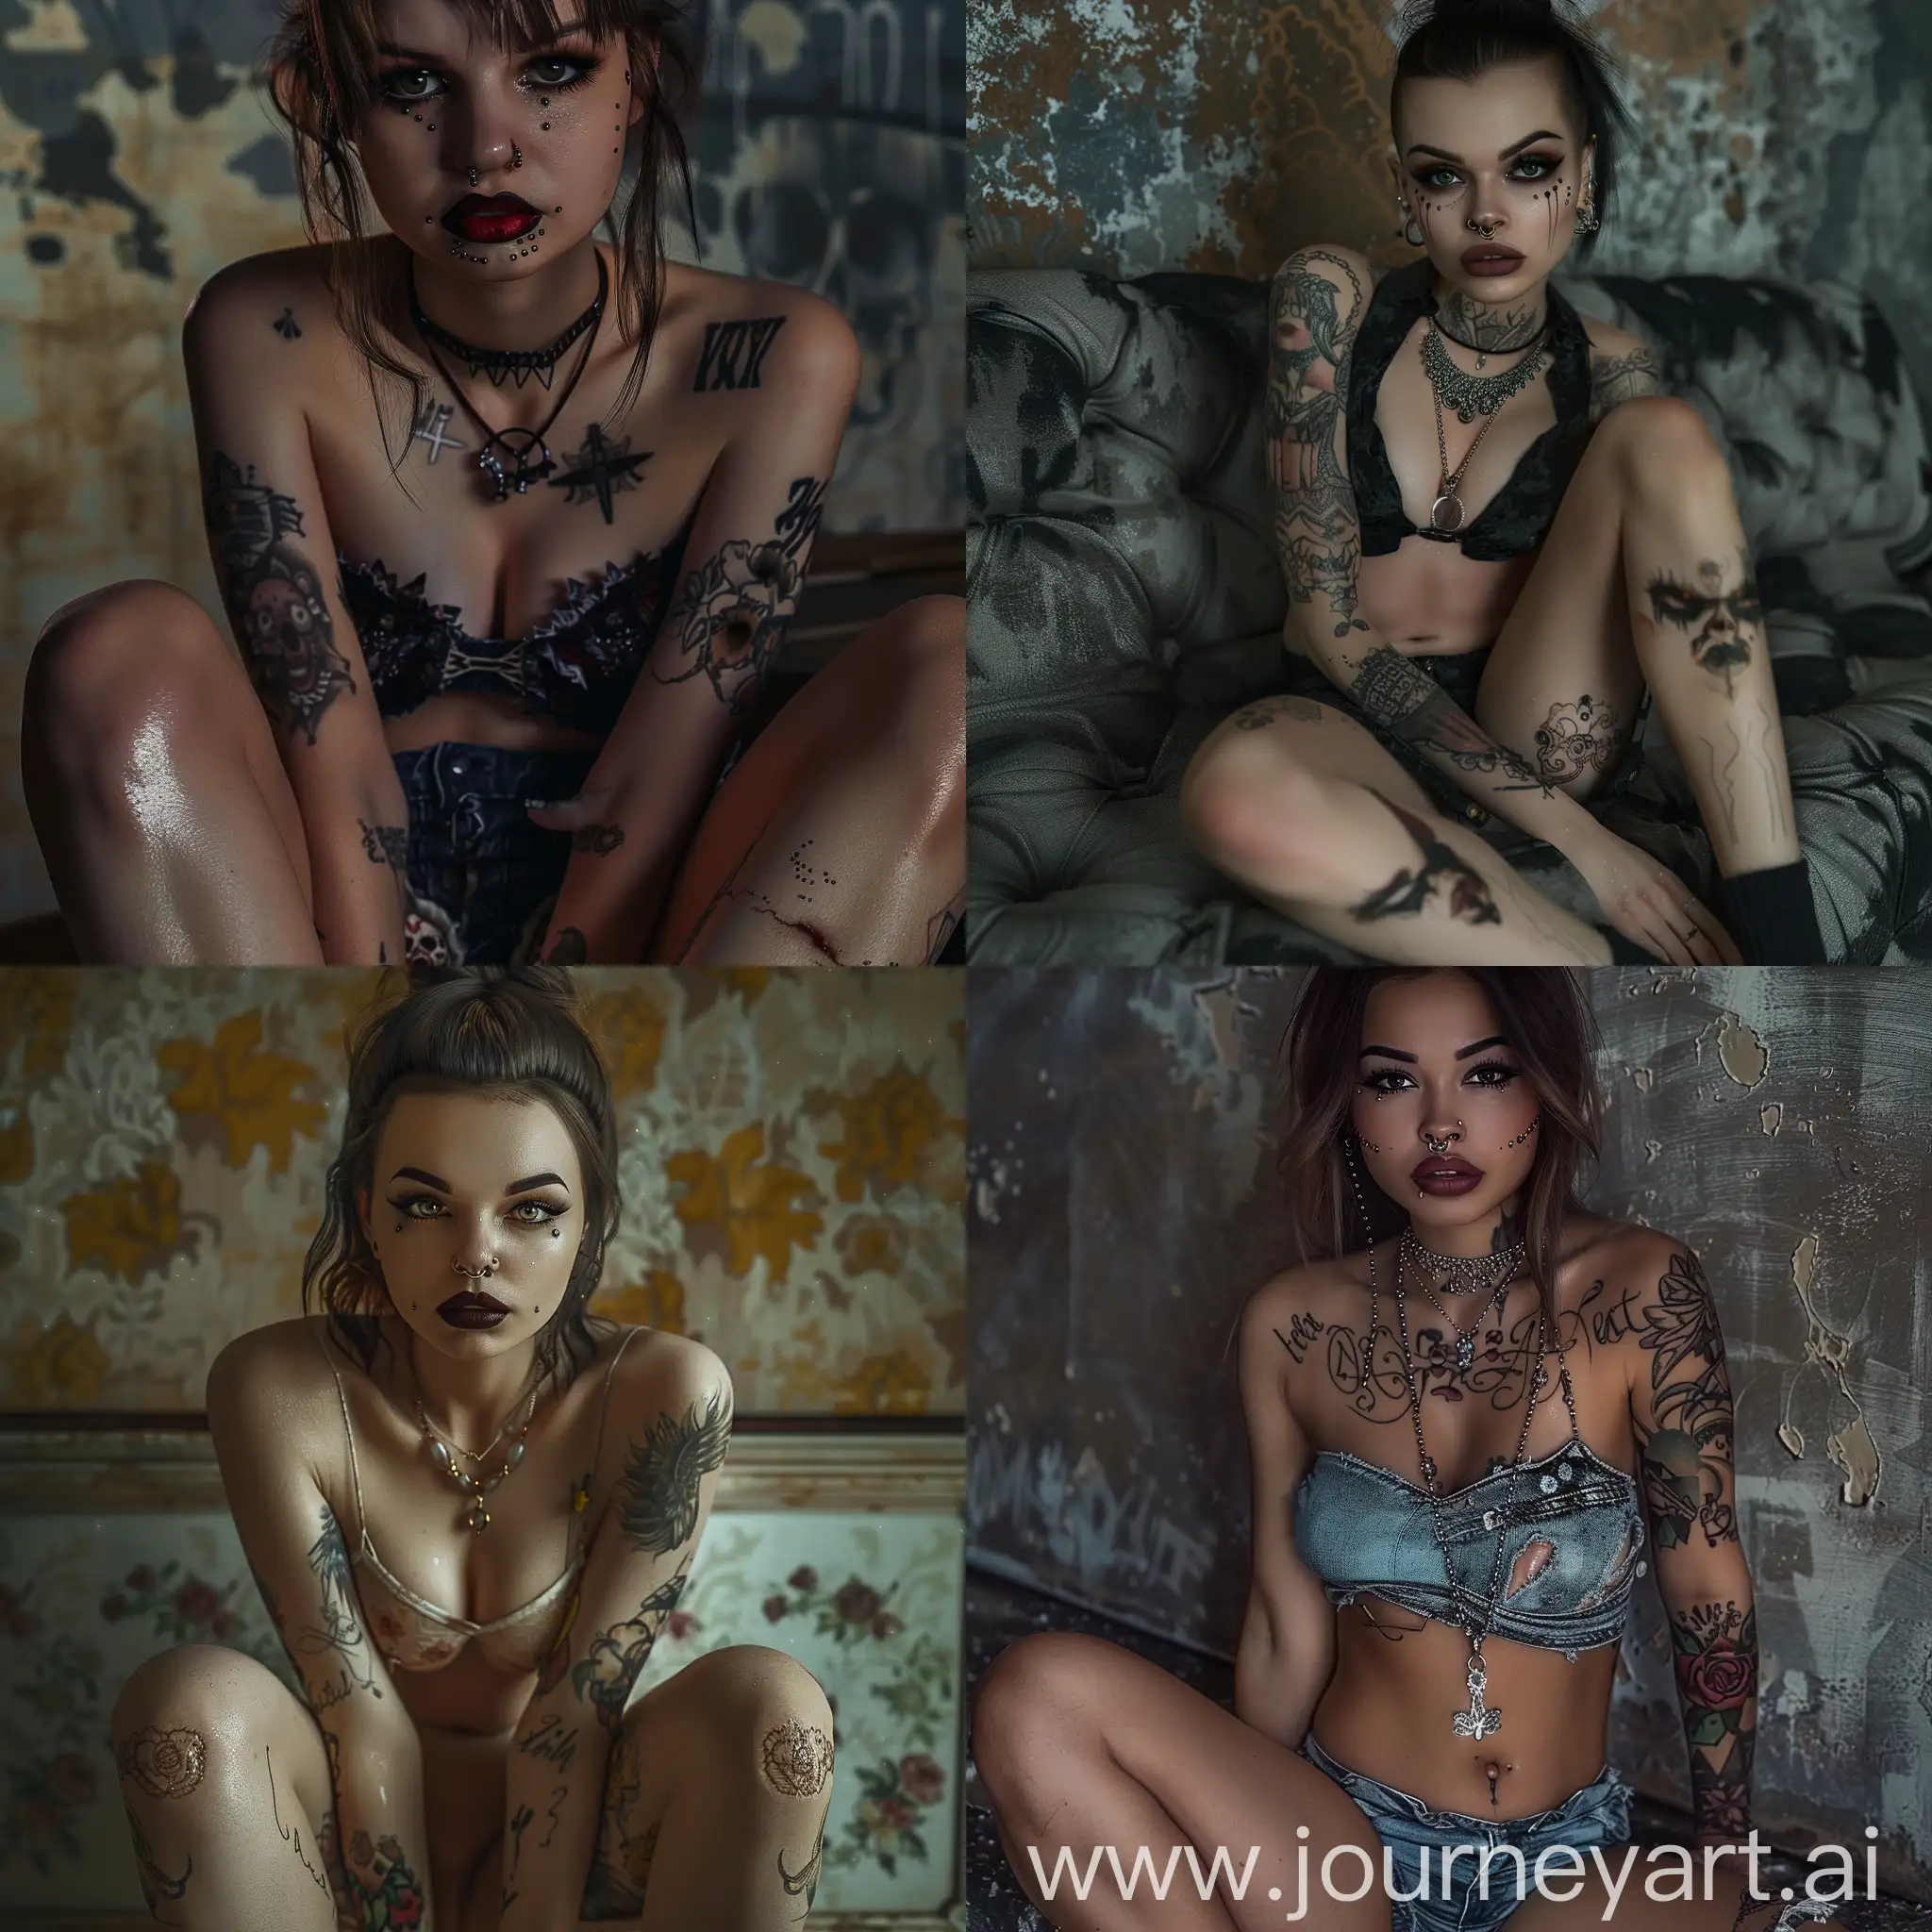 Stylish-Russian-Hipster-Girl-Edgy-Glamour-Photography-with-Alluring-Streetwear-and-Unique-Facial-Piercings